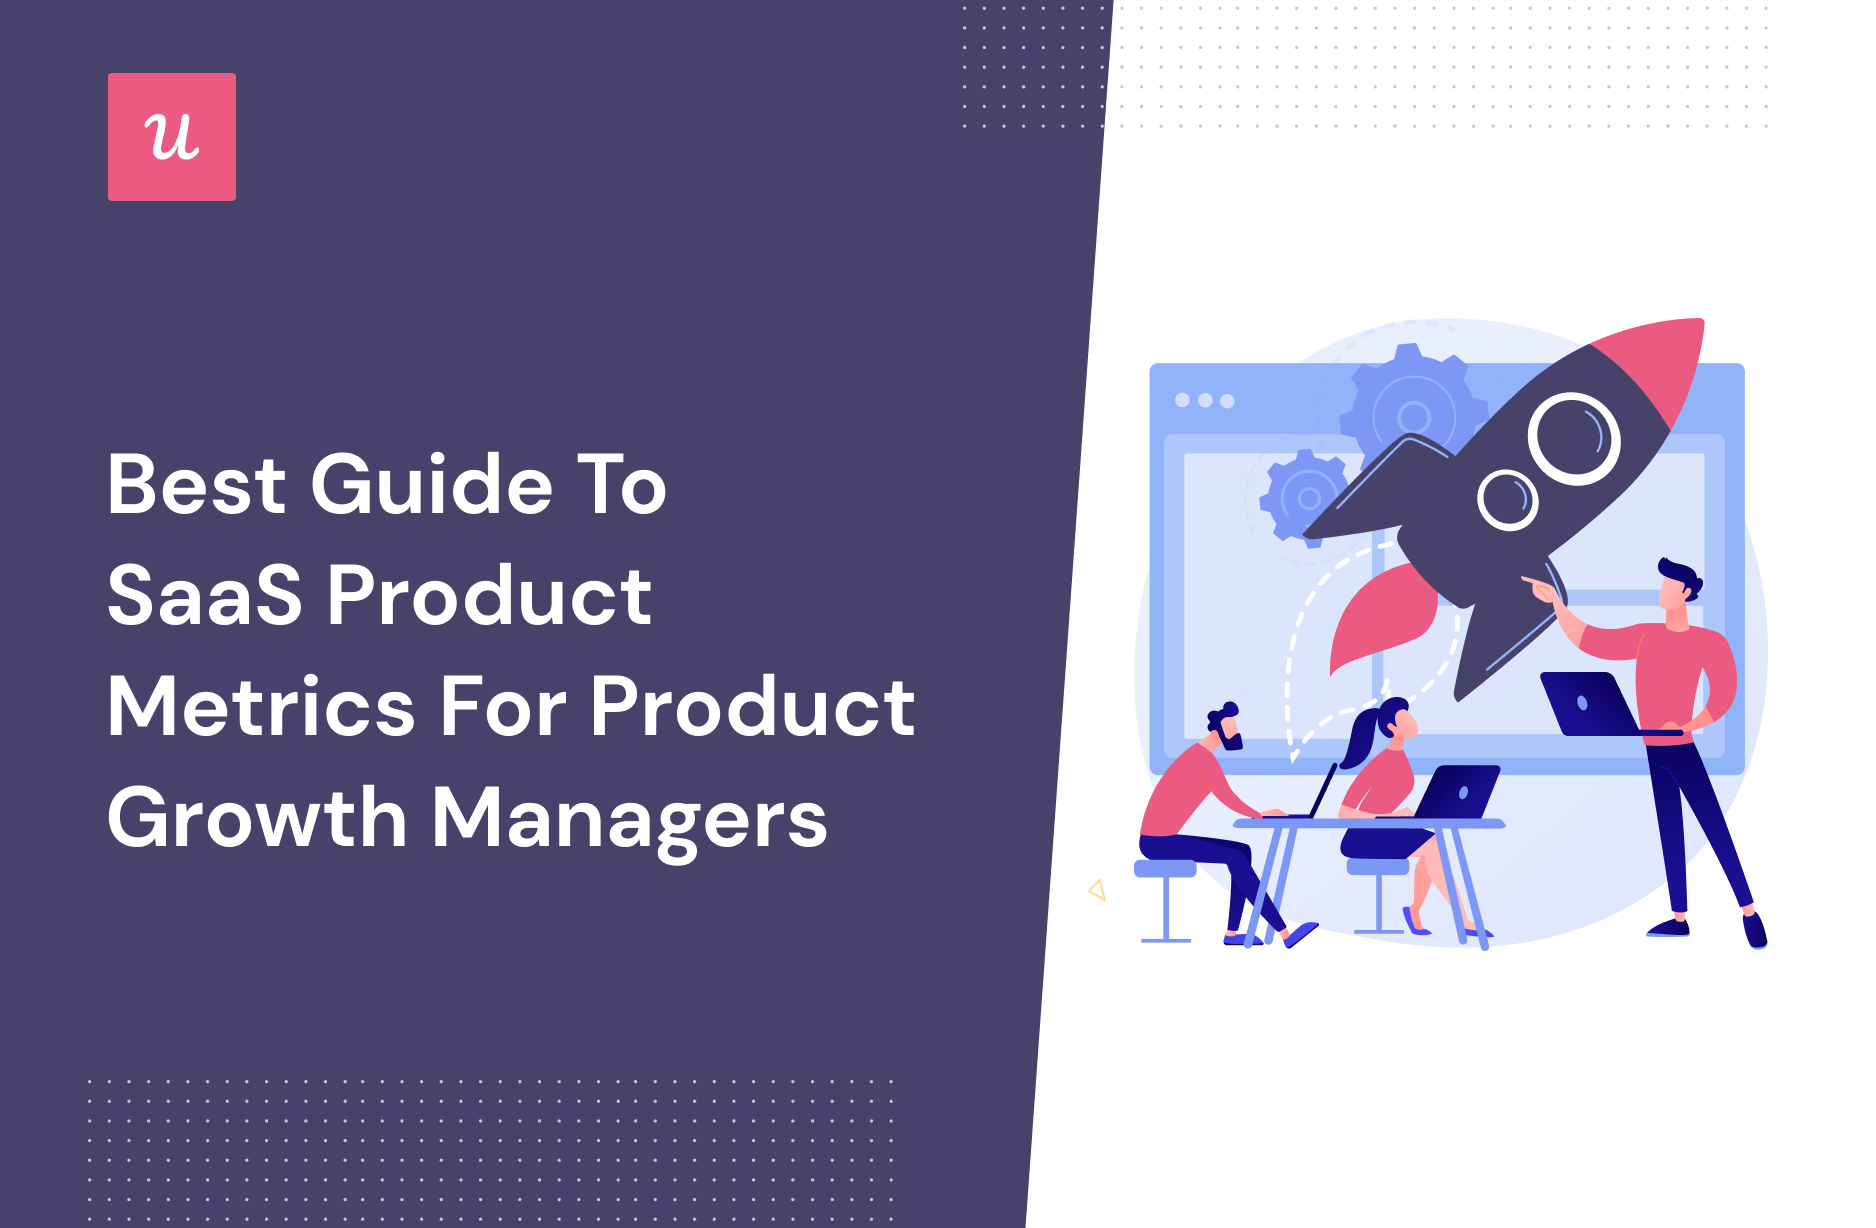 Best-Guide-To-SaaS-Product-Metrics-For-Product-Growth-Managers